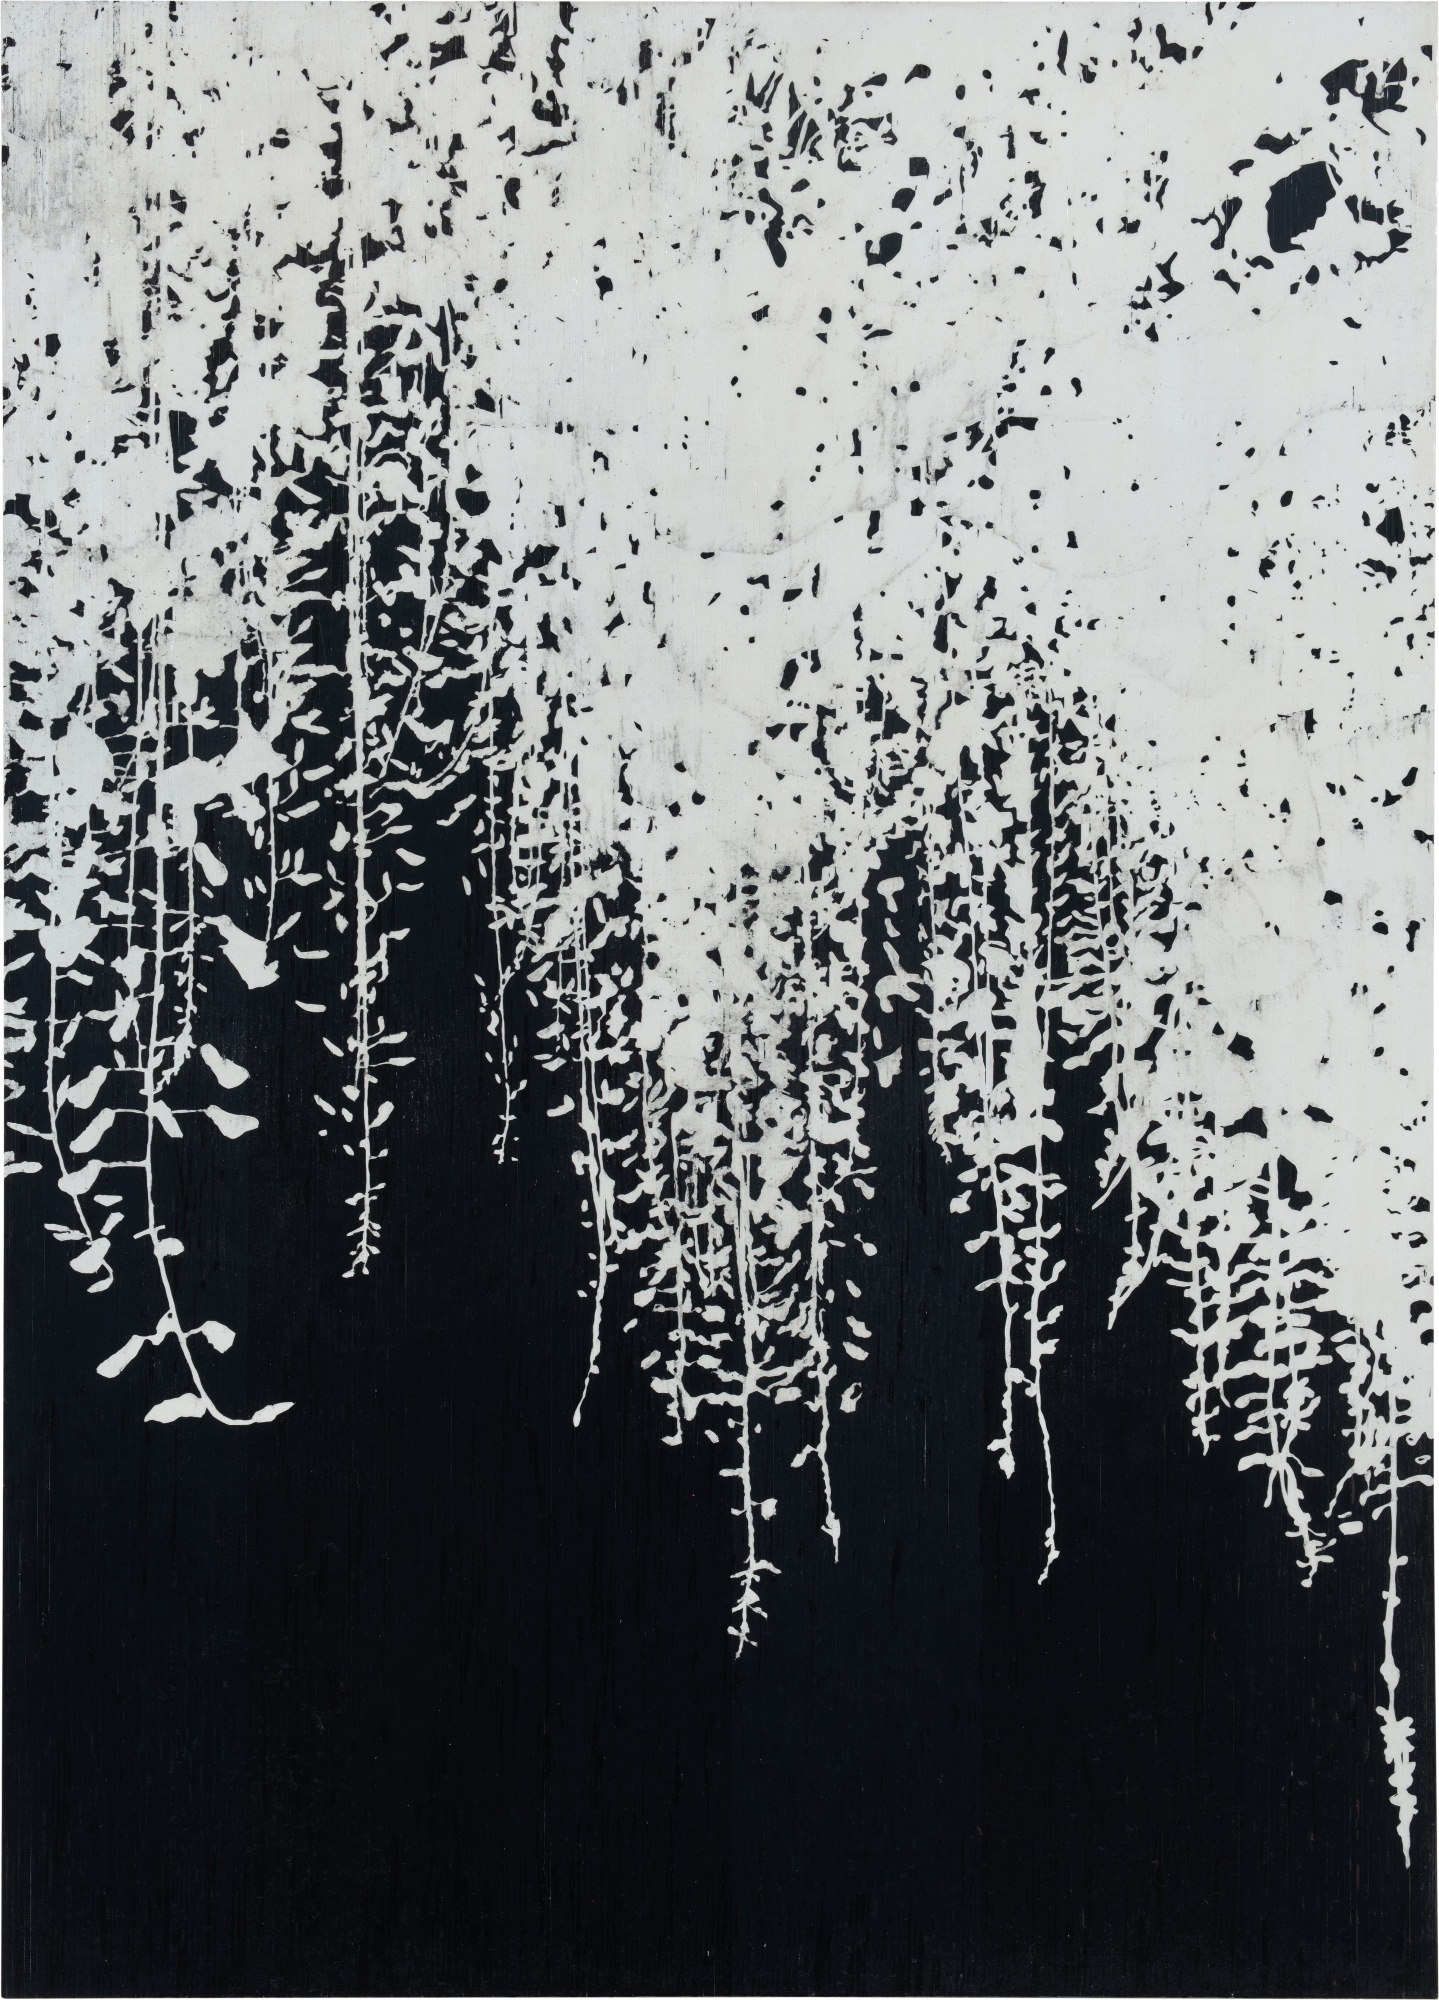 Gregor Hildebrandt, You lean against a silver-willow…flowers drifting  widespread in the water (2014)